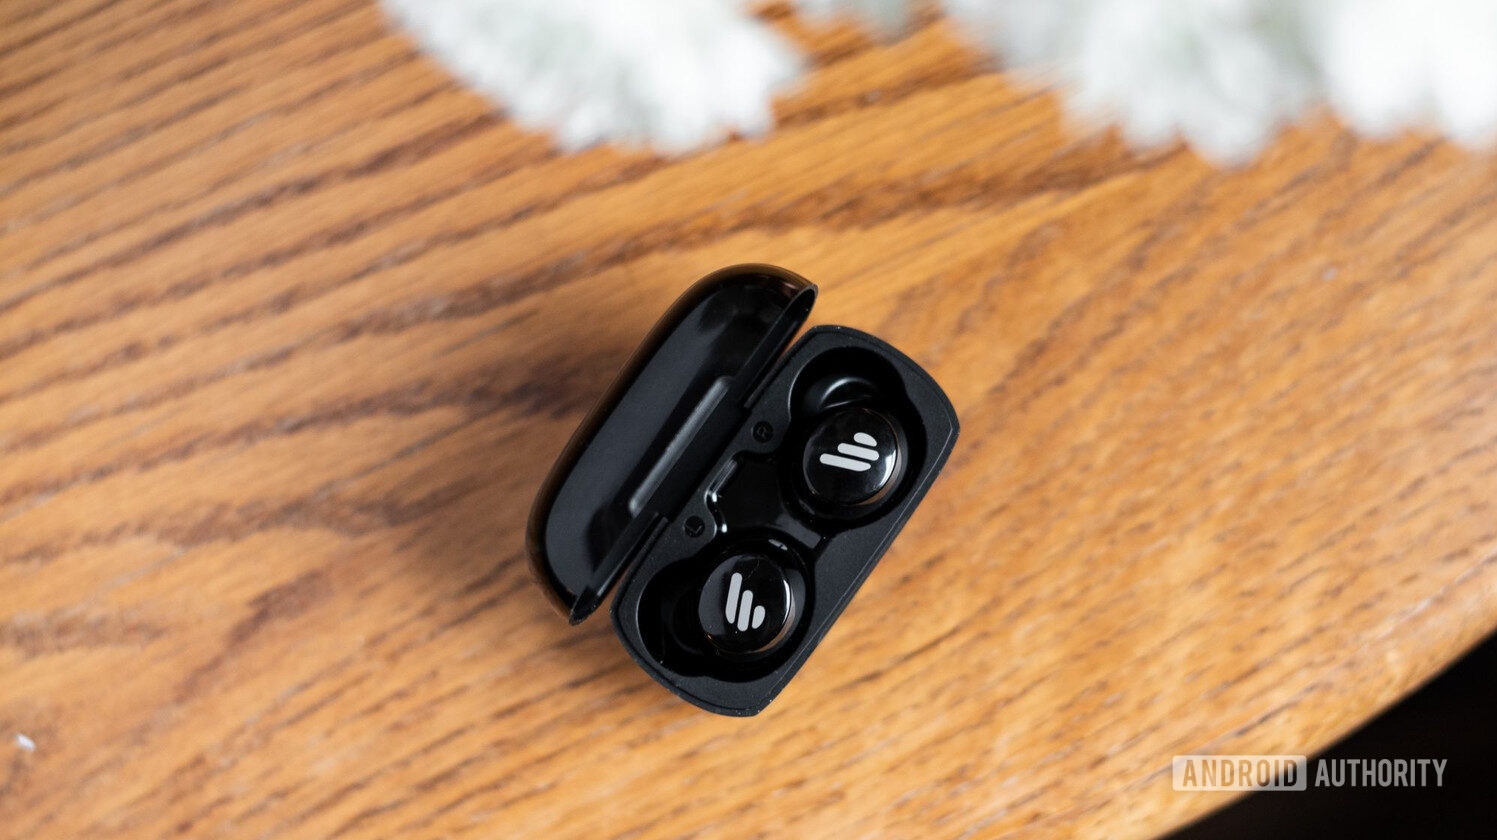 Why pay extra for expensive earbuds when cheap earbuds sound good enough??